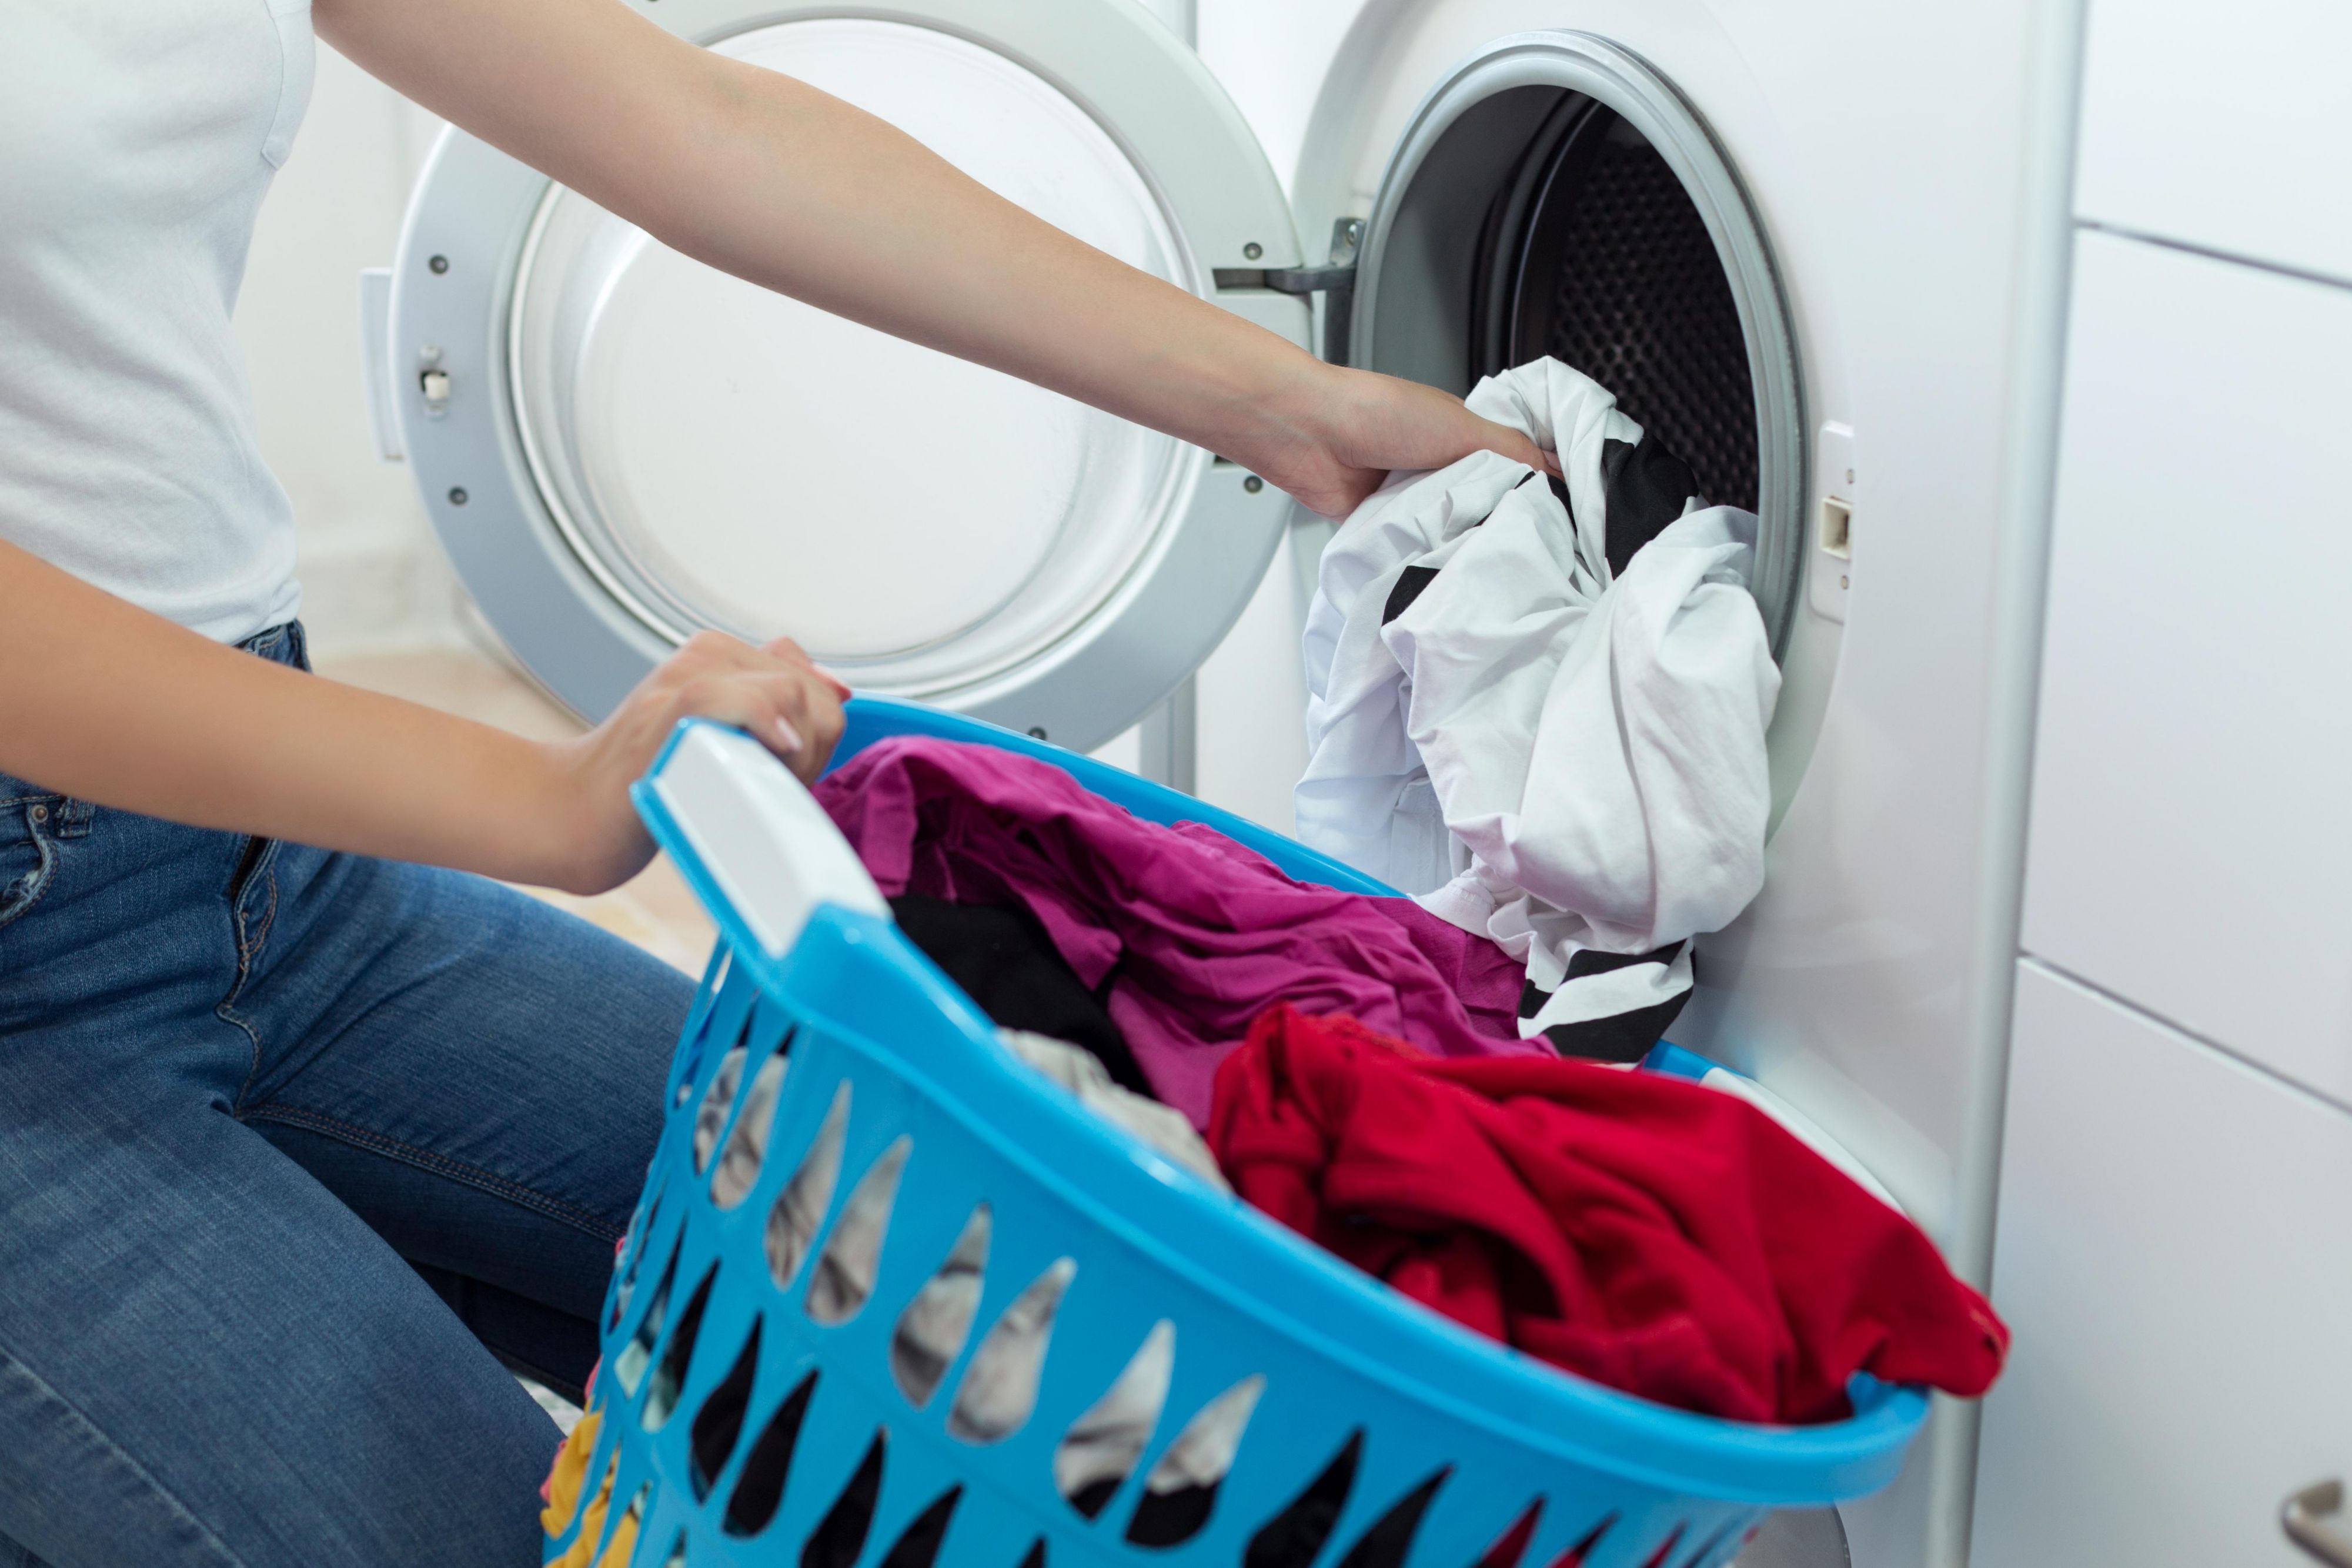 Feel free to use our complimentary, 24/7 laundry facility at your convenience.